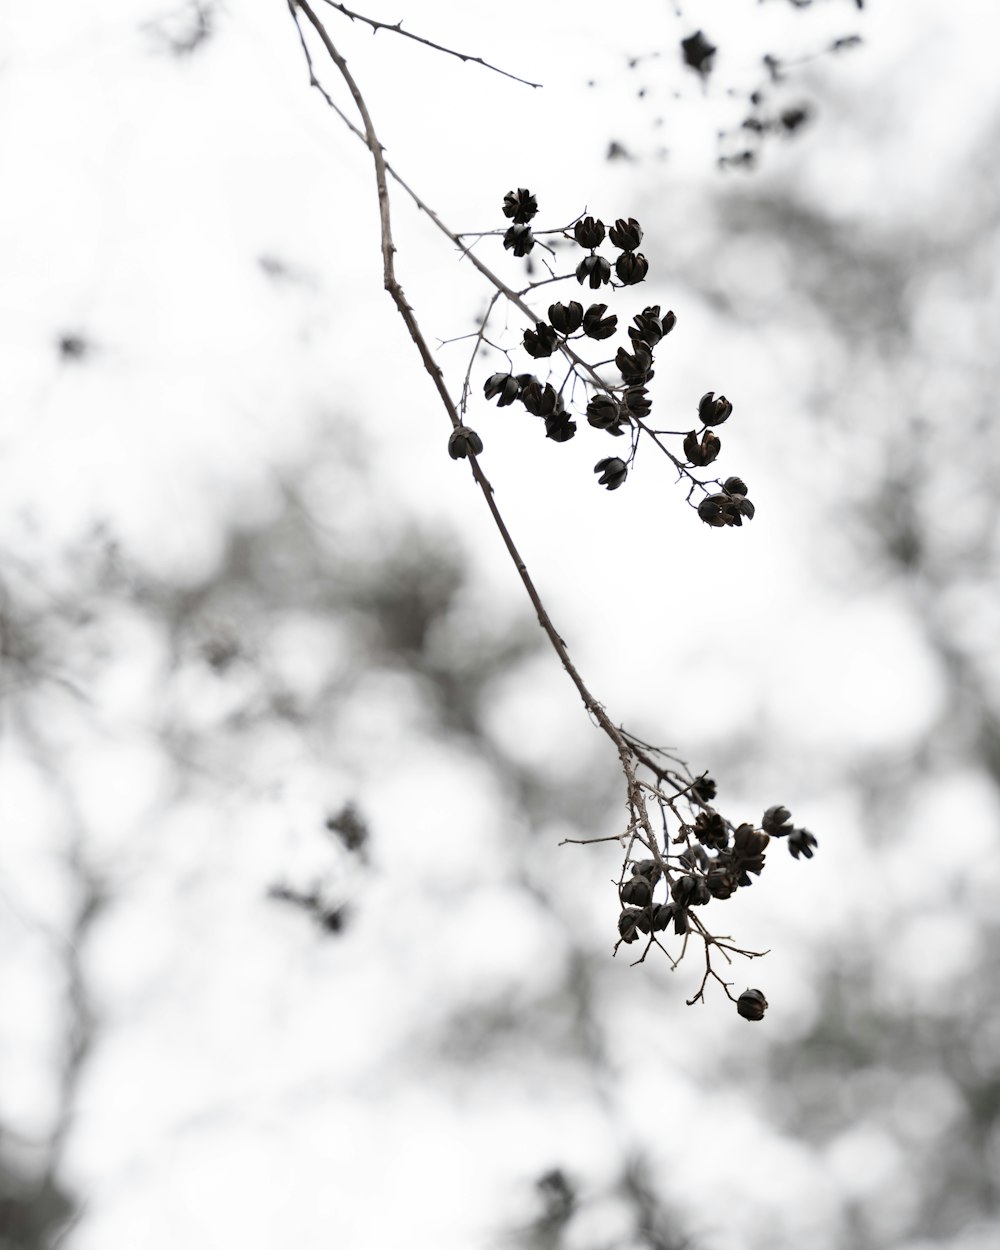 a black and white photo of berries on a tree branch